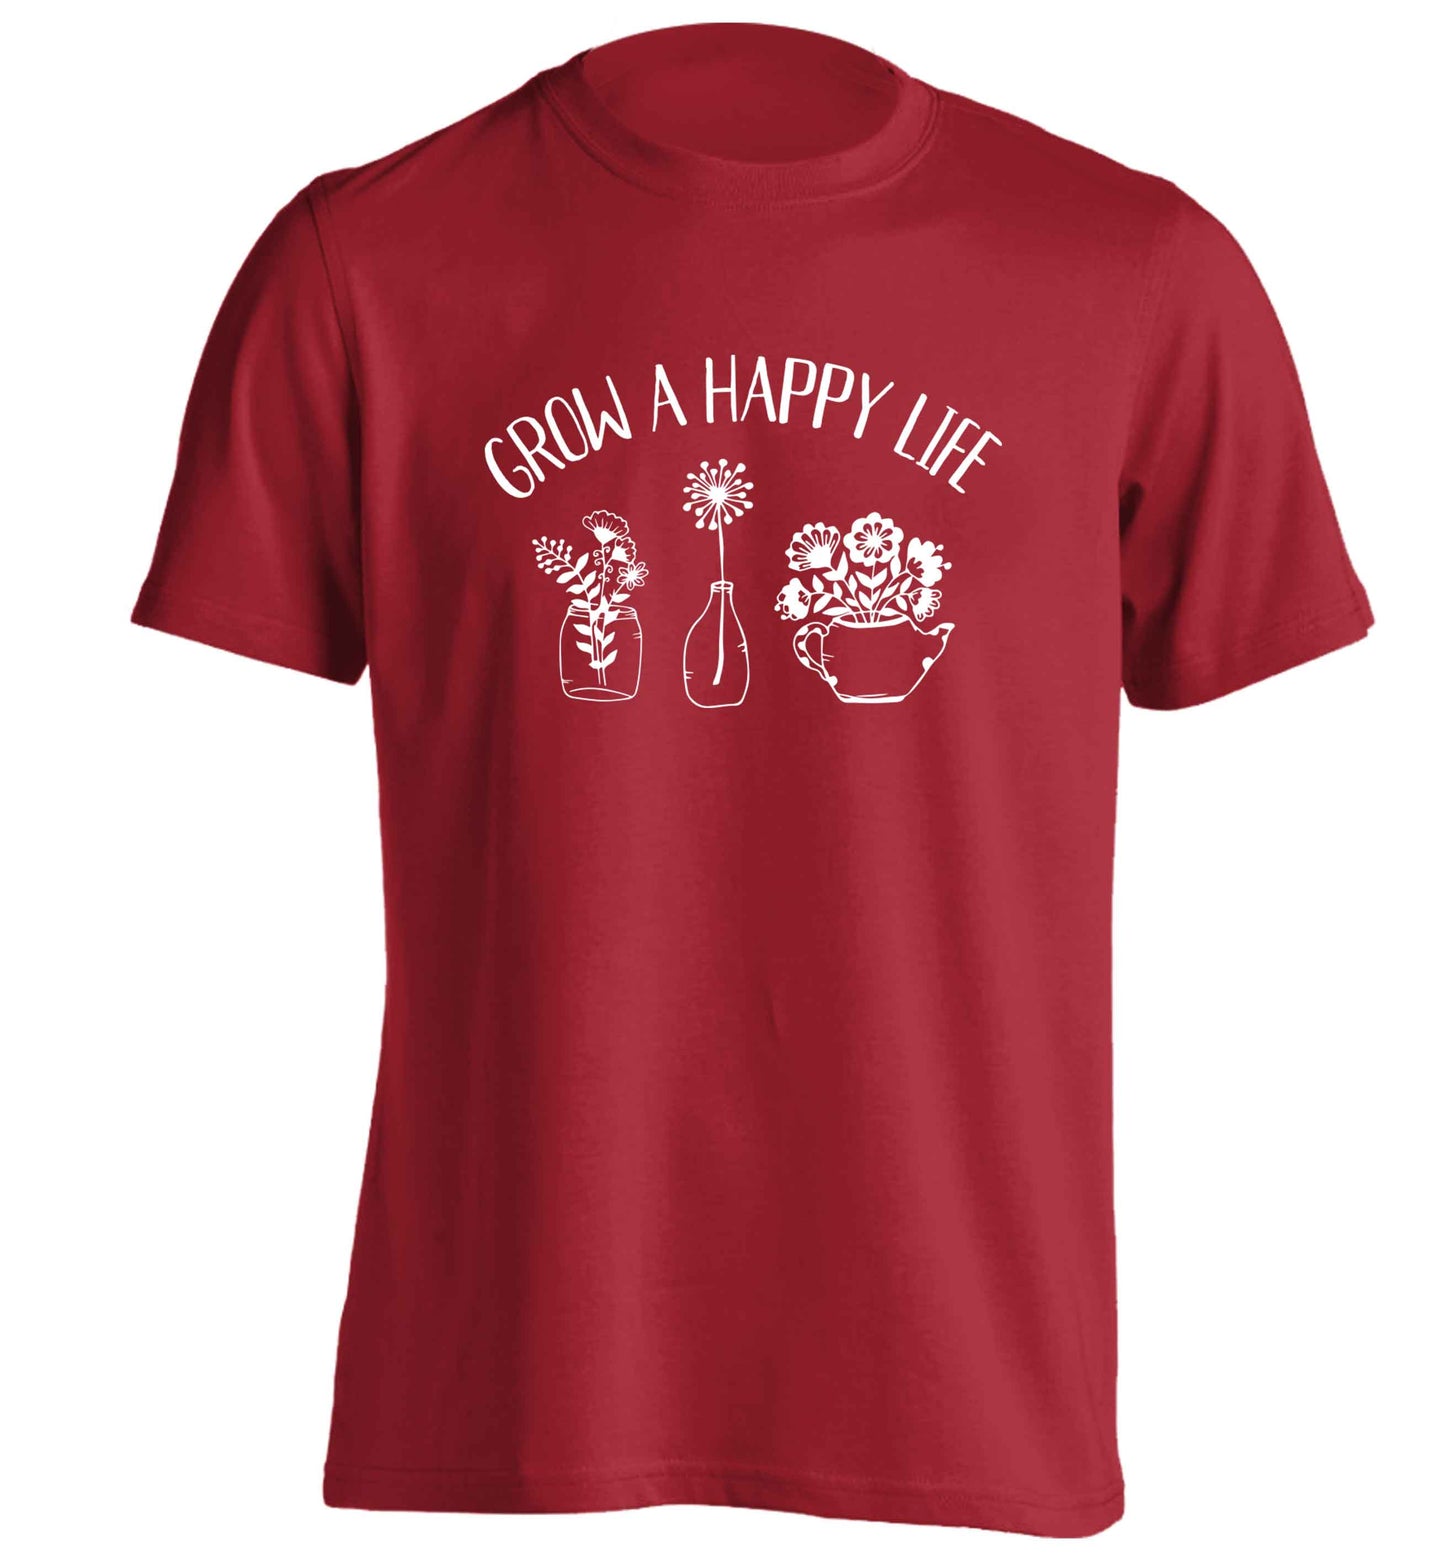 Grow a happy life adults unisex red Tshirt 2XL